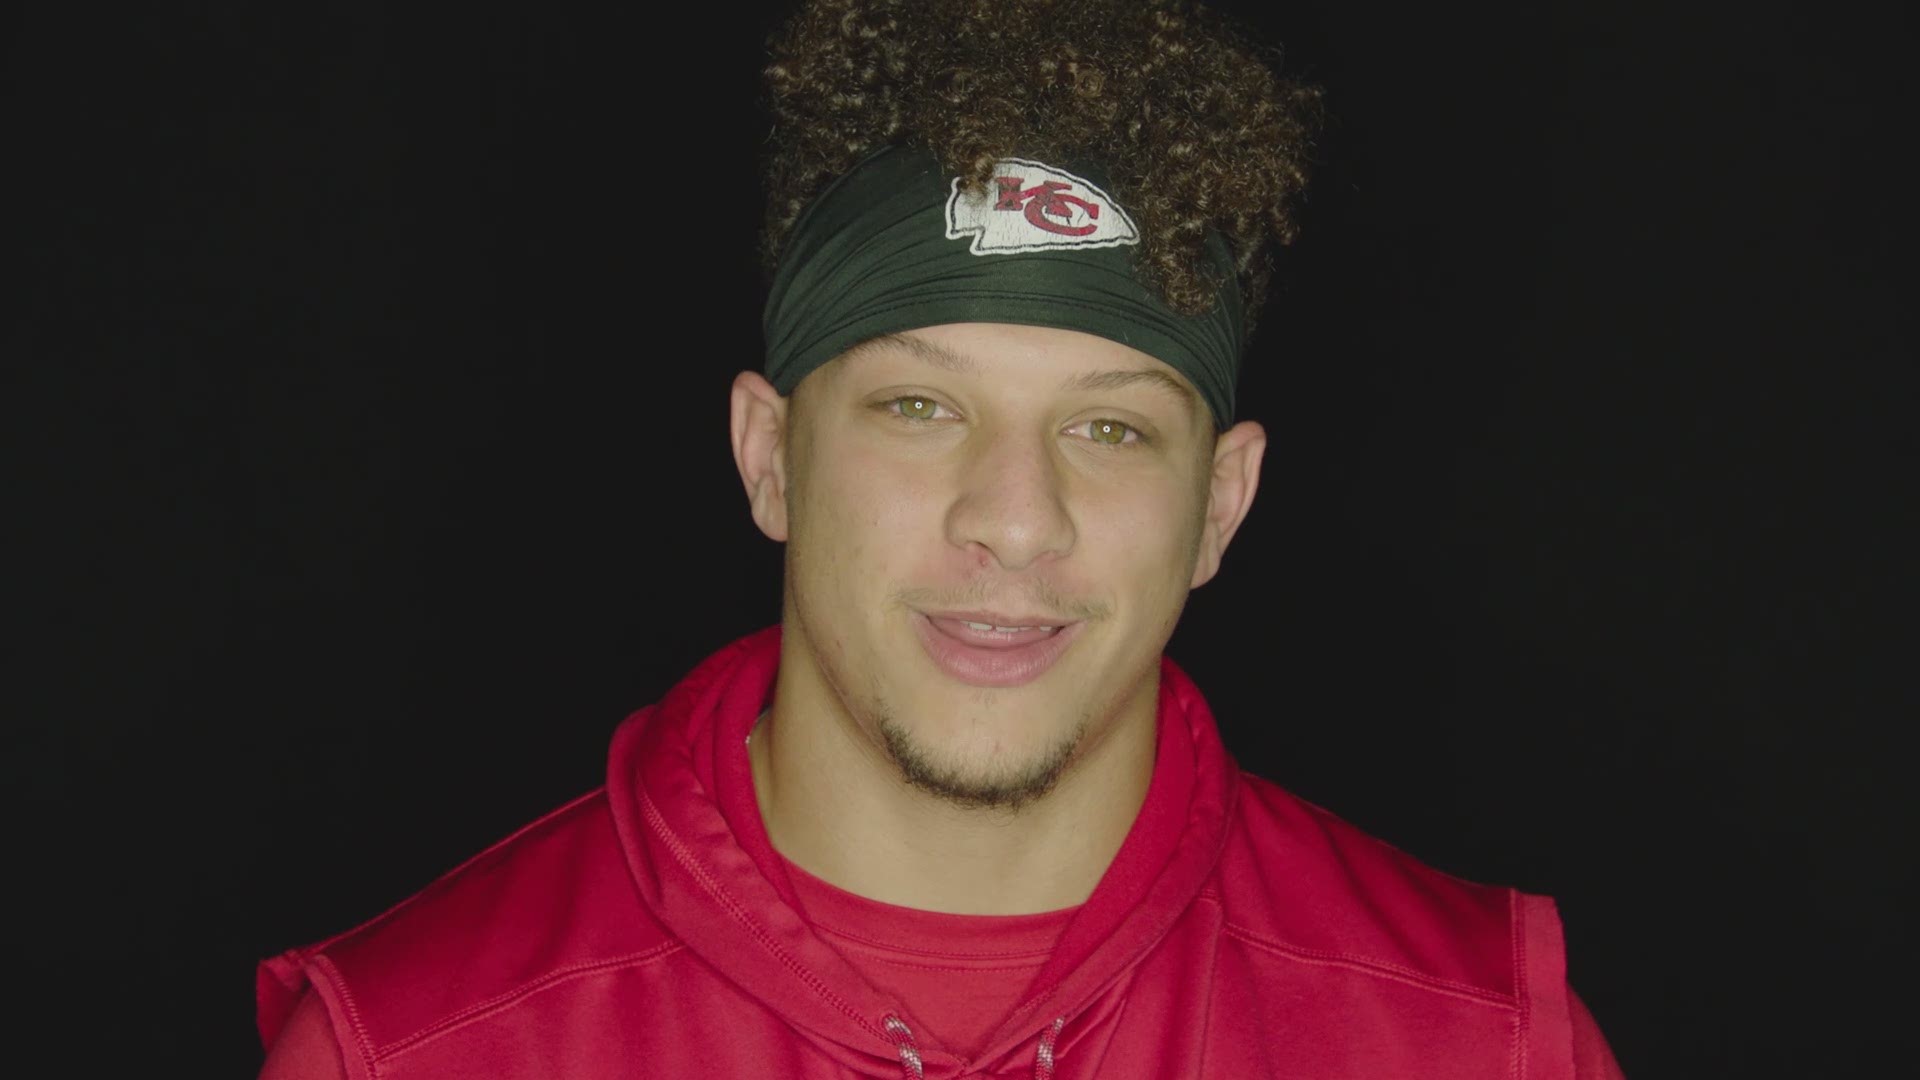 Athletes have the ability to inspire and influence generations. This weekend NFL players around the league will sport cleats for a cause. The story behind one of the most notable players' choice hits close to home. (Video: Chiefs.com)